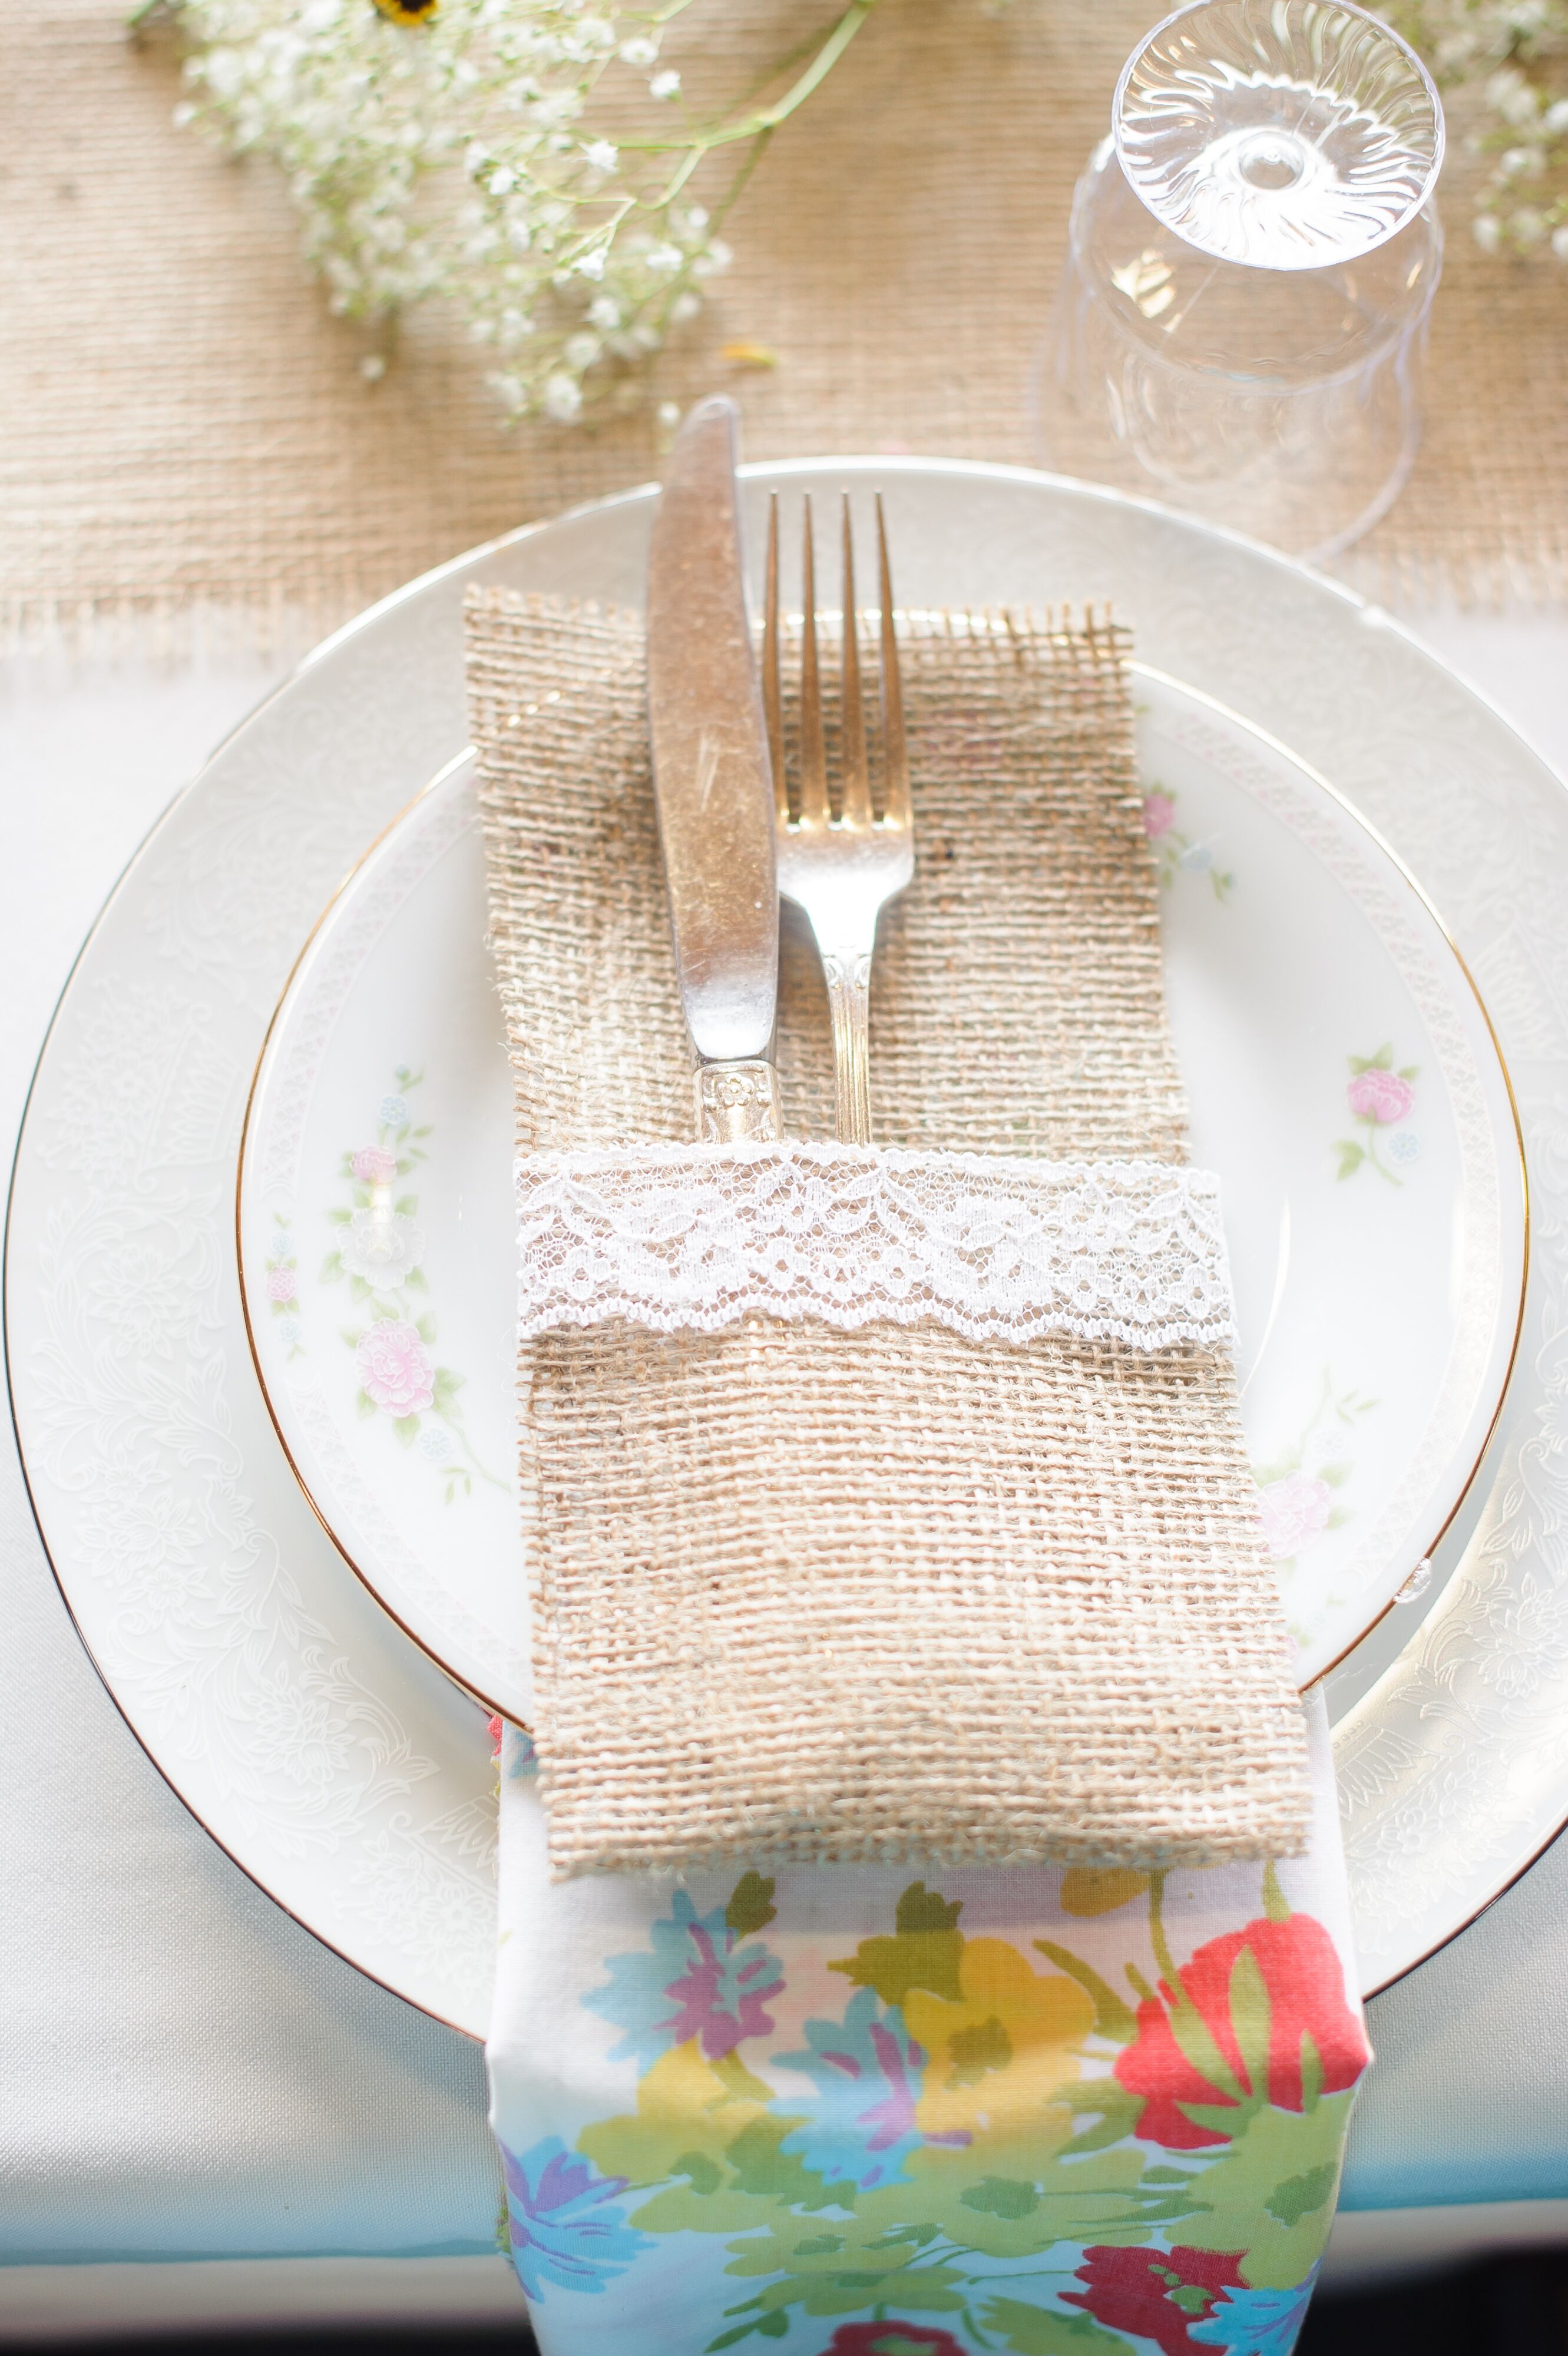 Burlap And Lace Place Settings With Floral Napkins